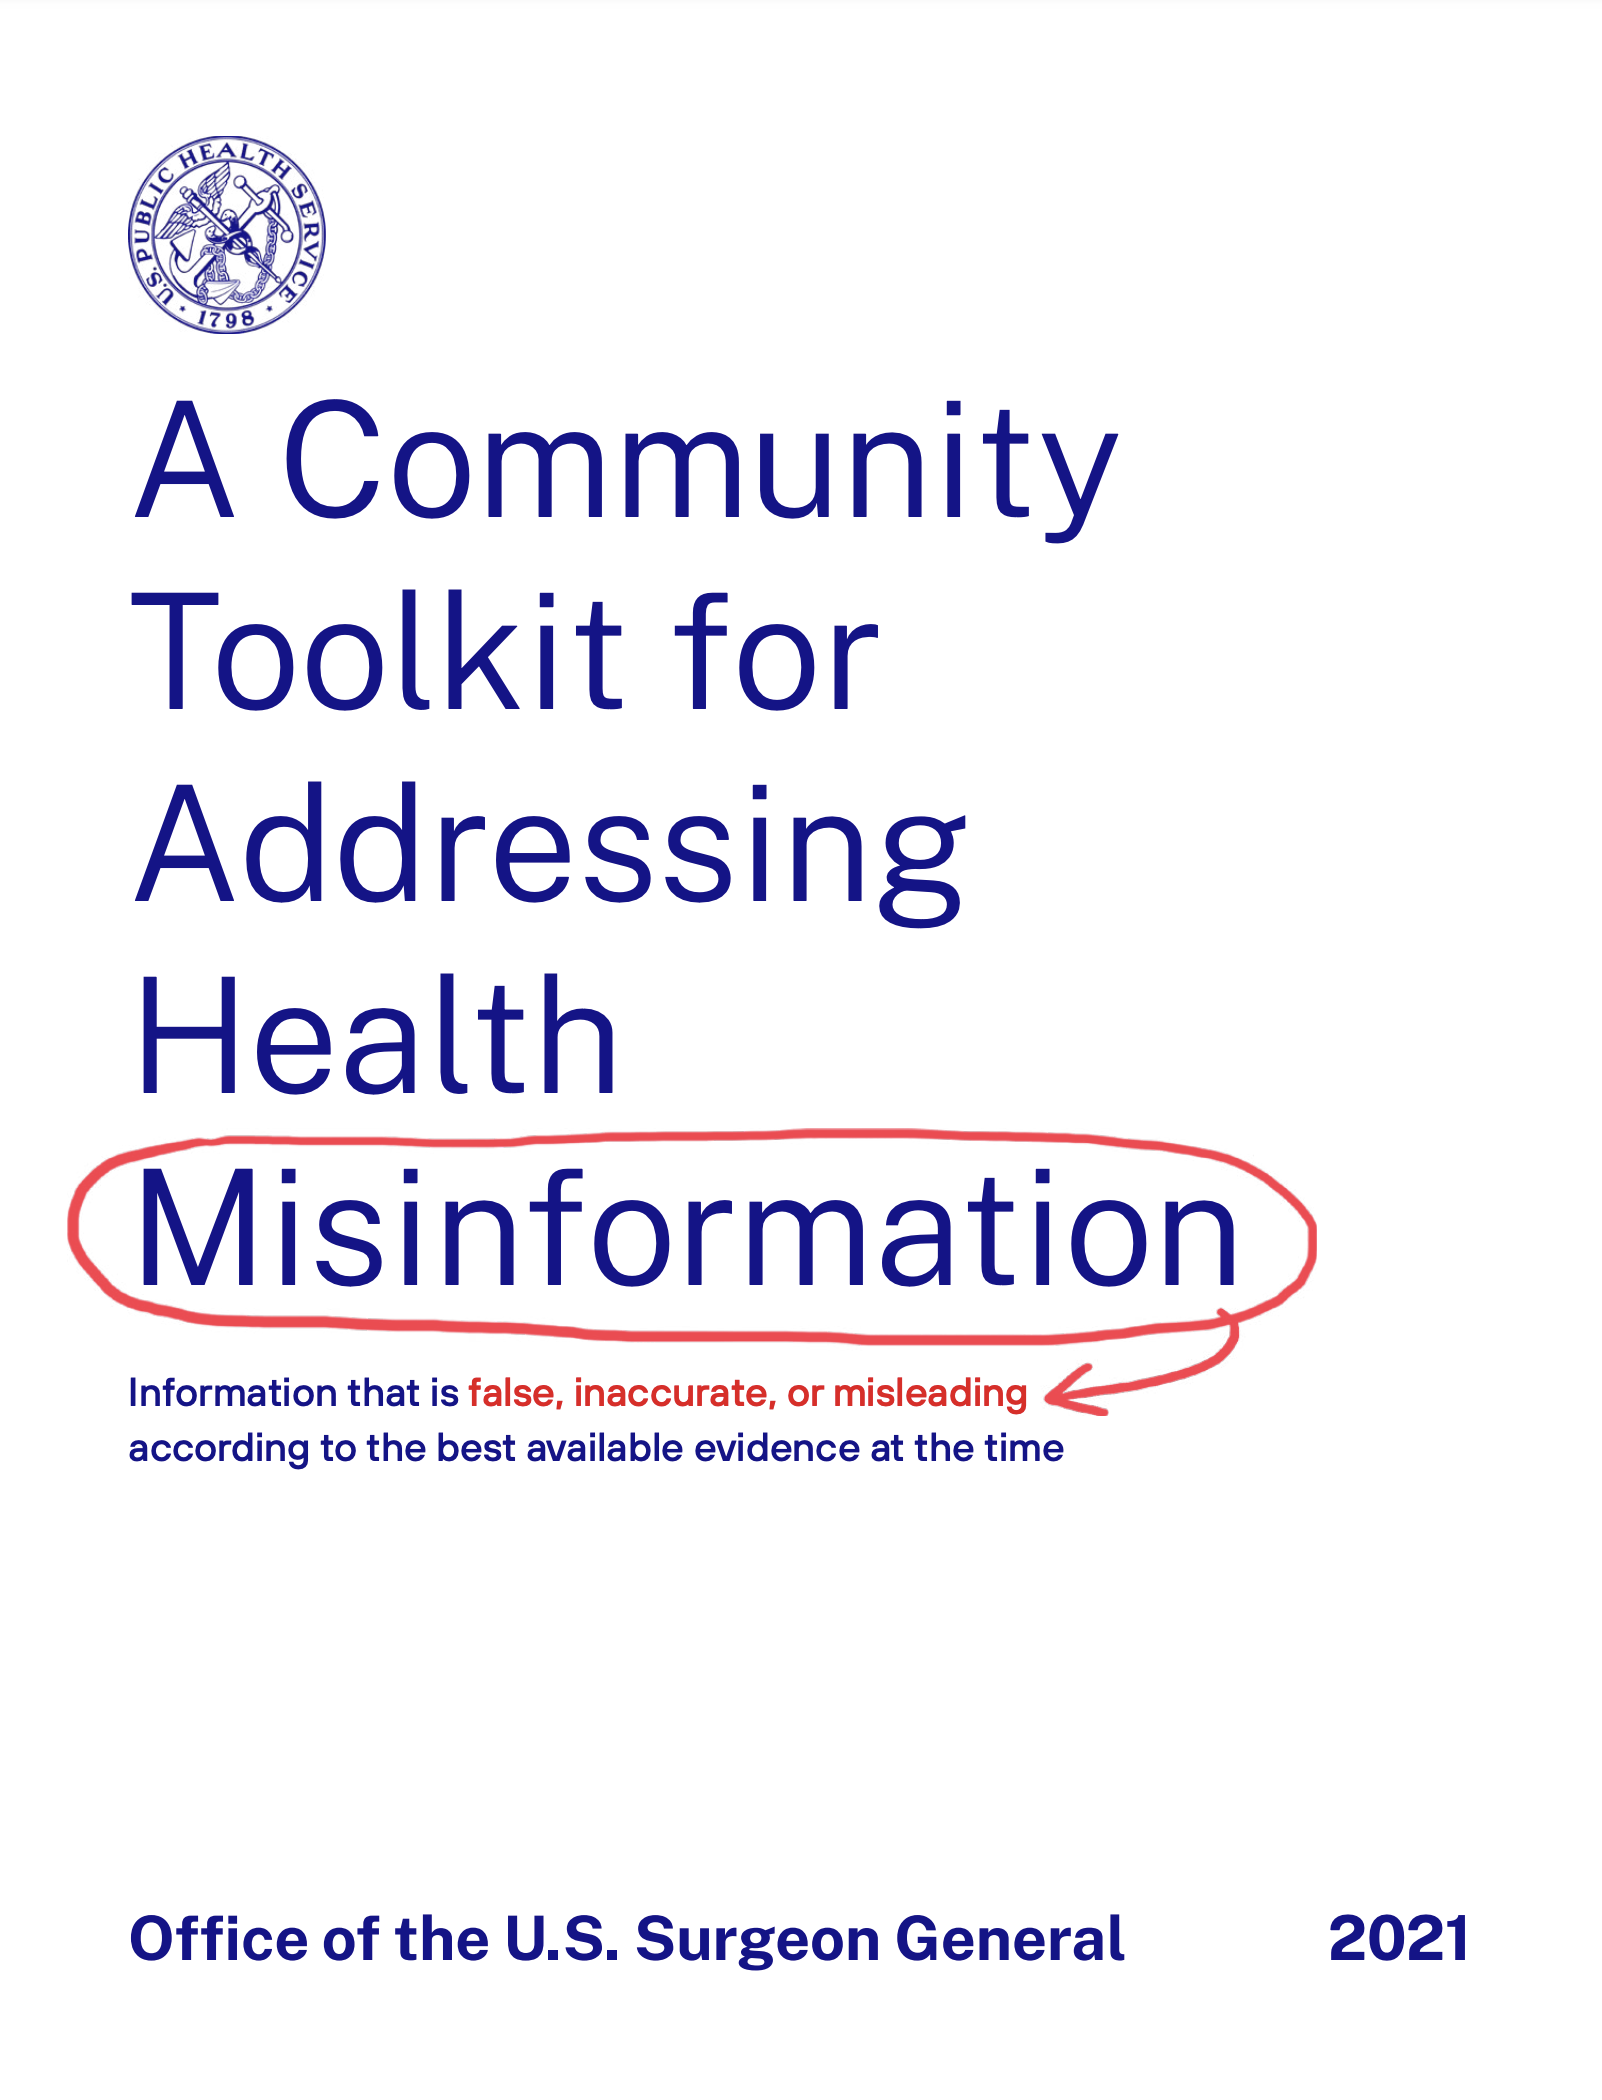 Cover image of the U.S. Surgeon General Misinformation Toolkit